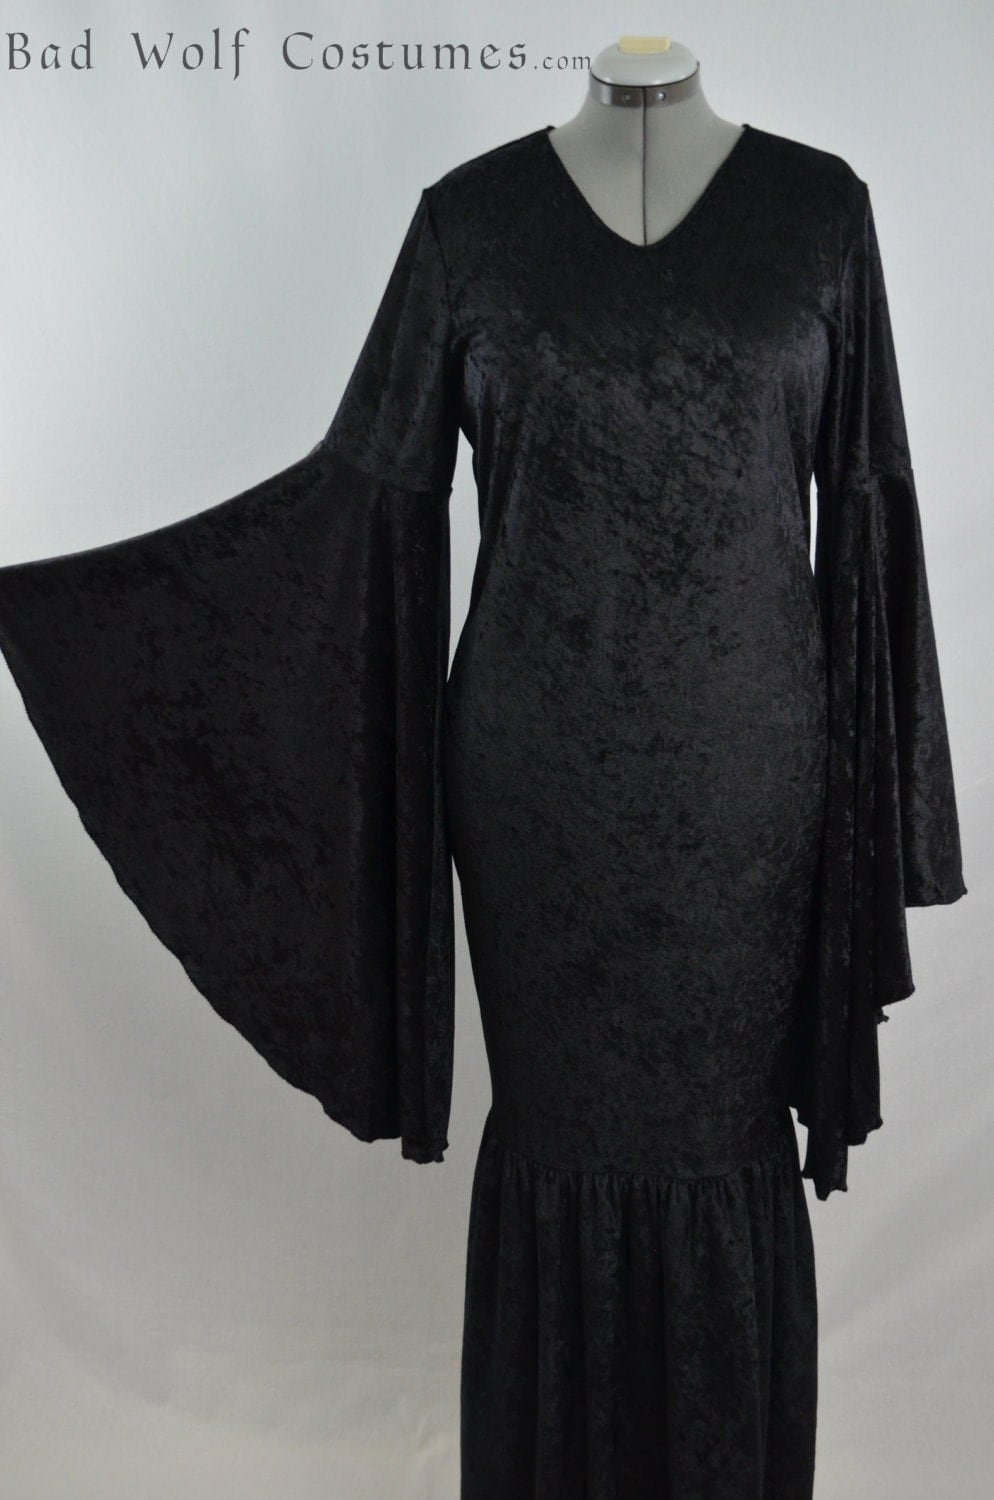 Morticia Addams Dress Gown Gothic vampire mermaid